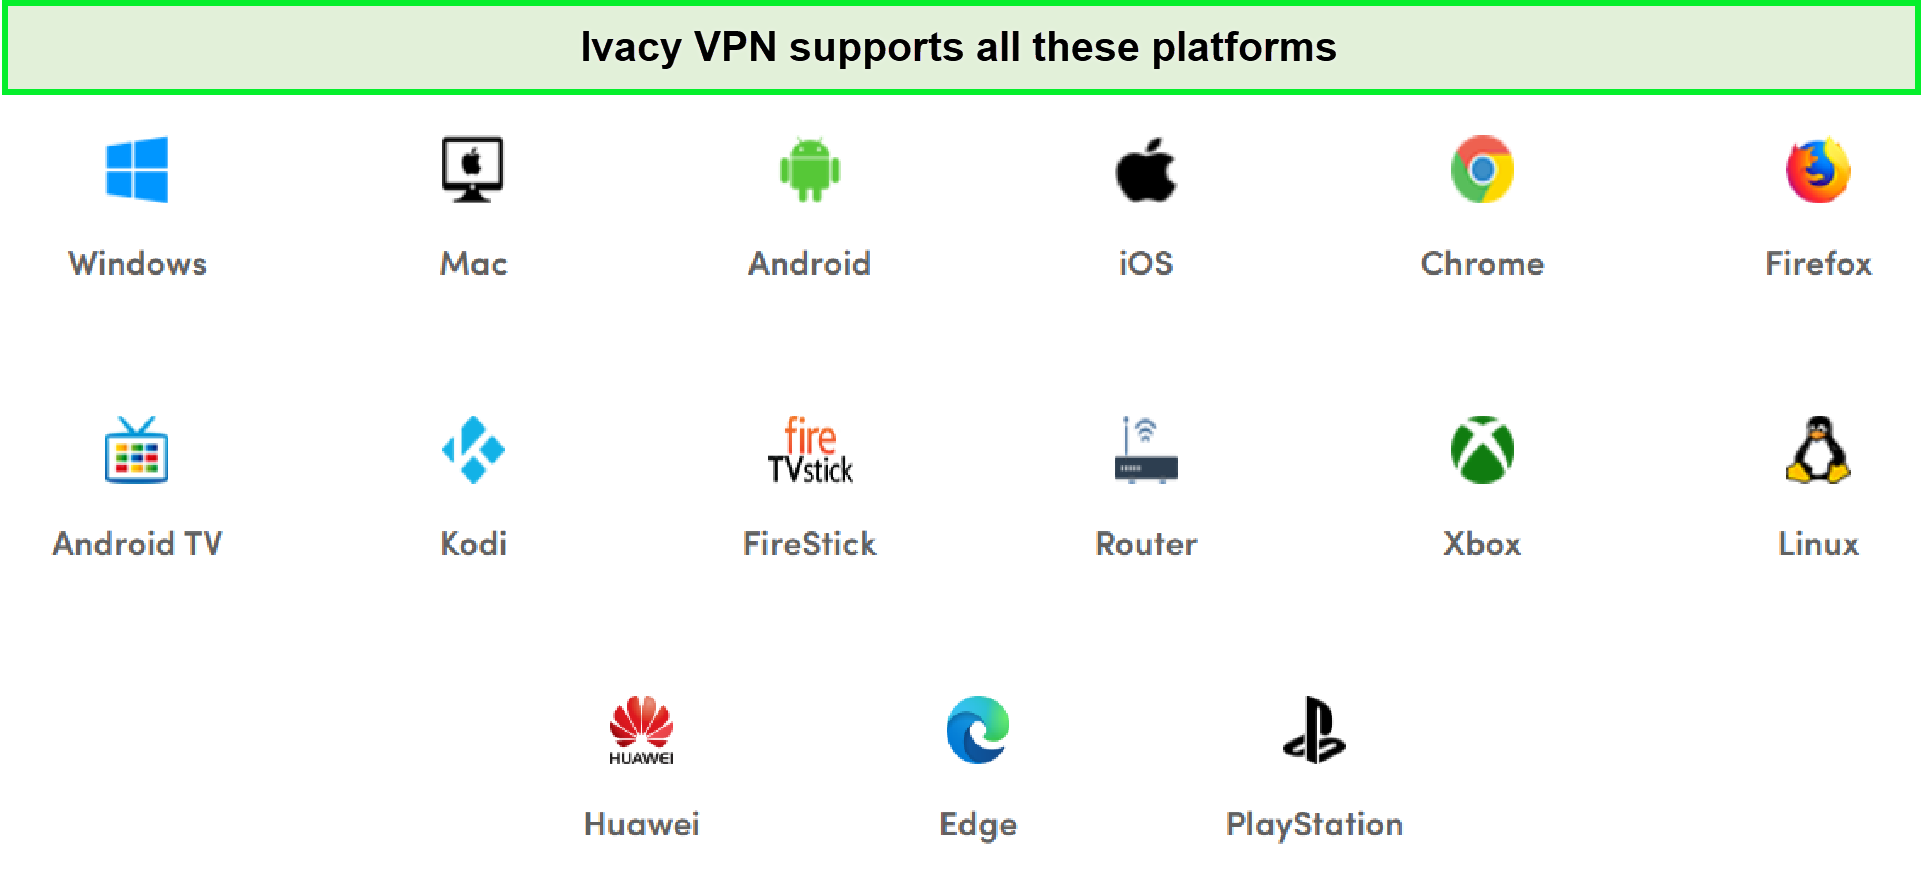 ivacy-device-compatibility